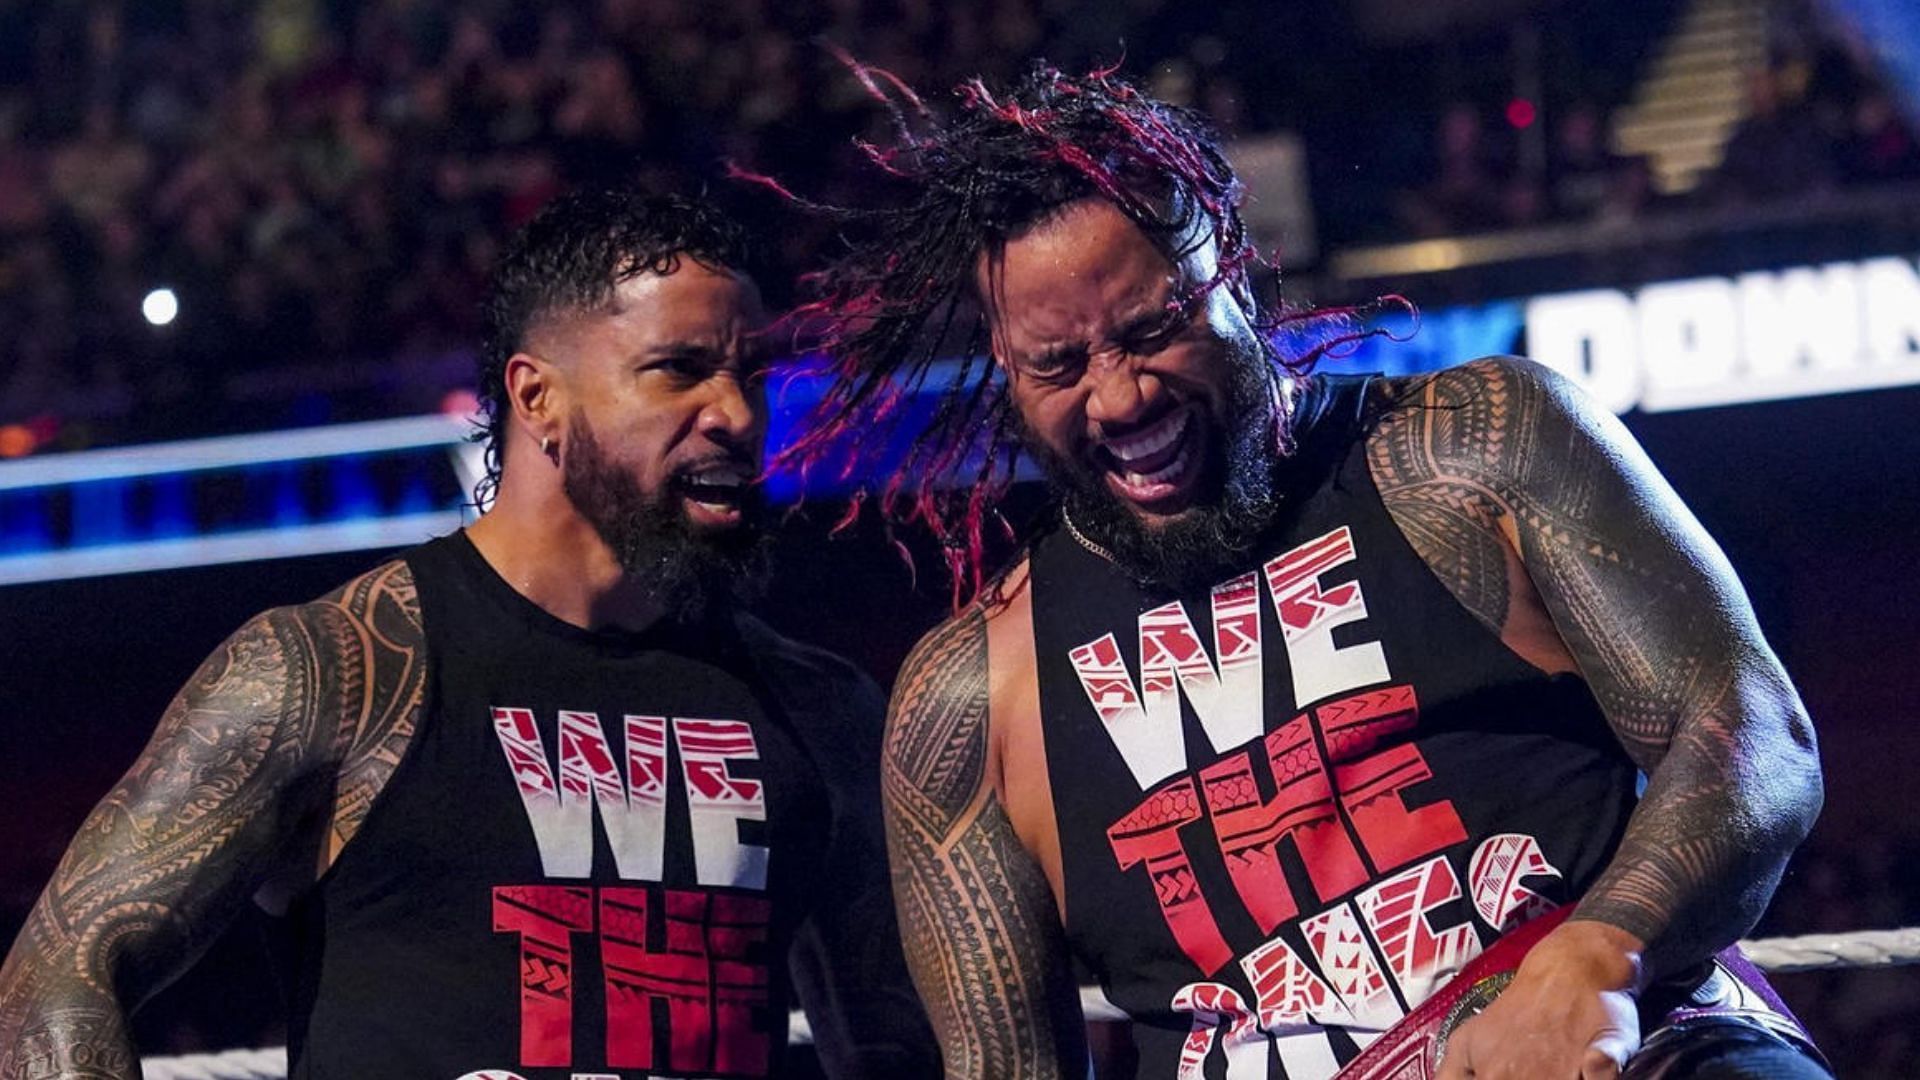 The Usos were confrontated by a major star on SmackDown